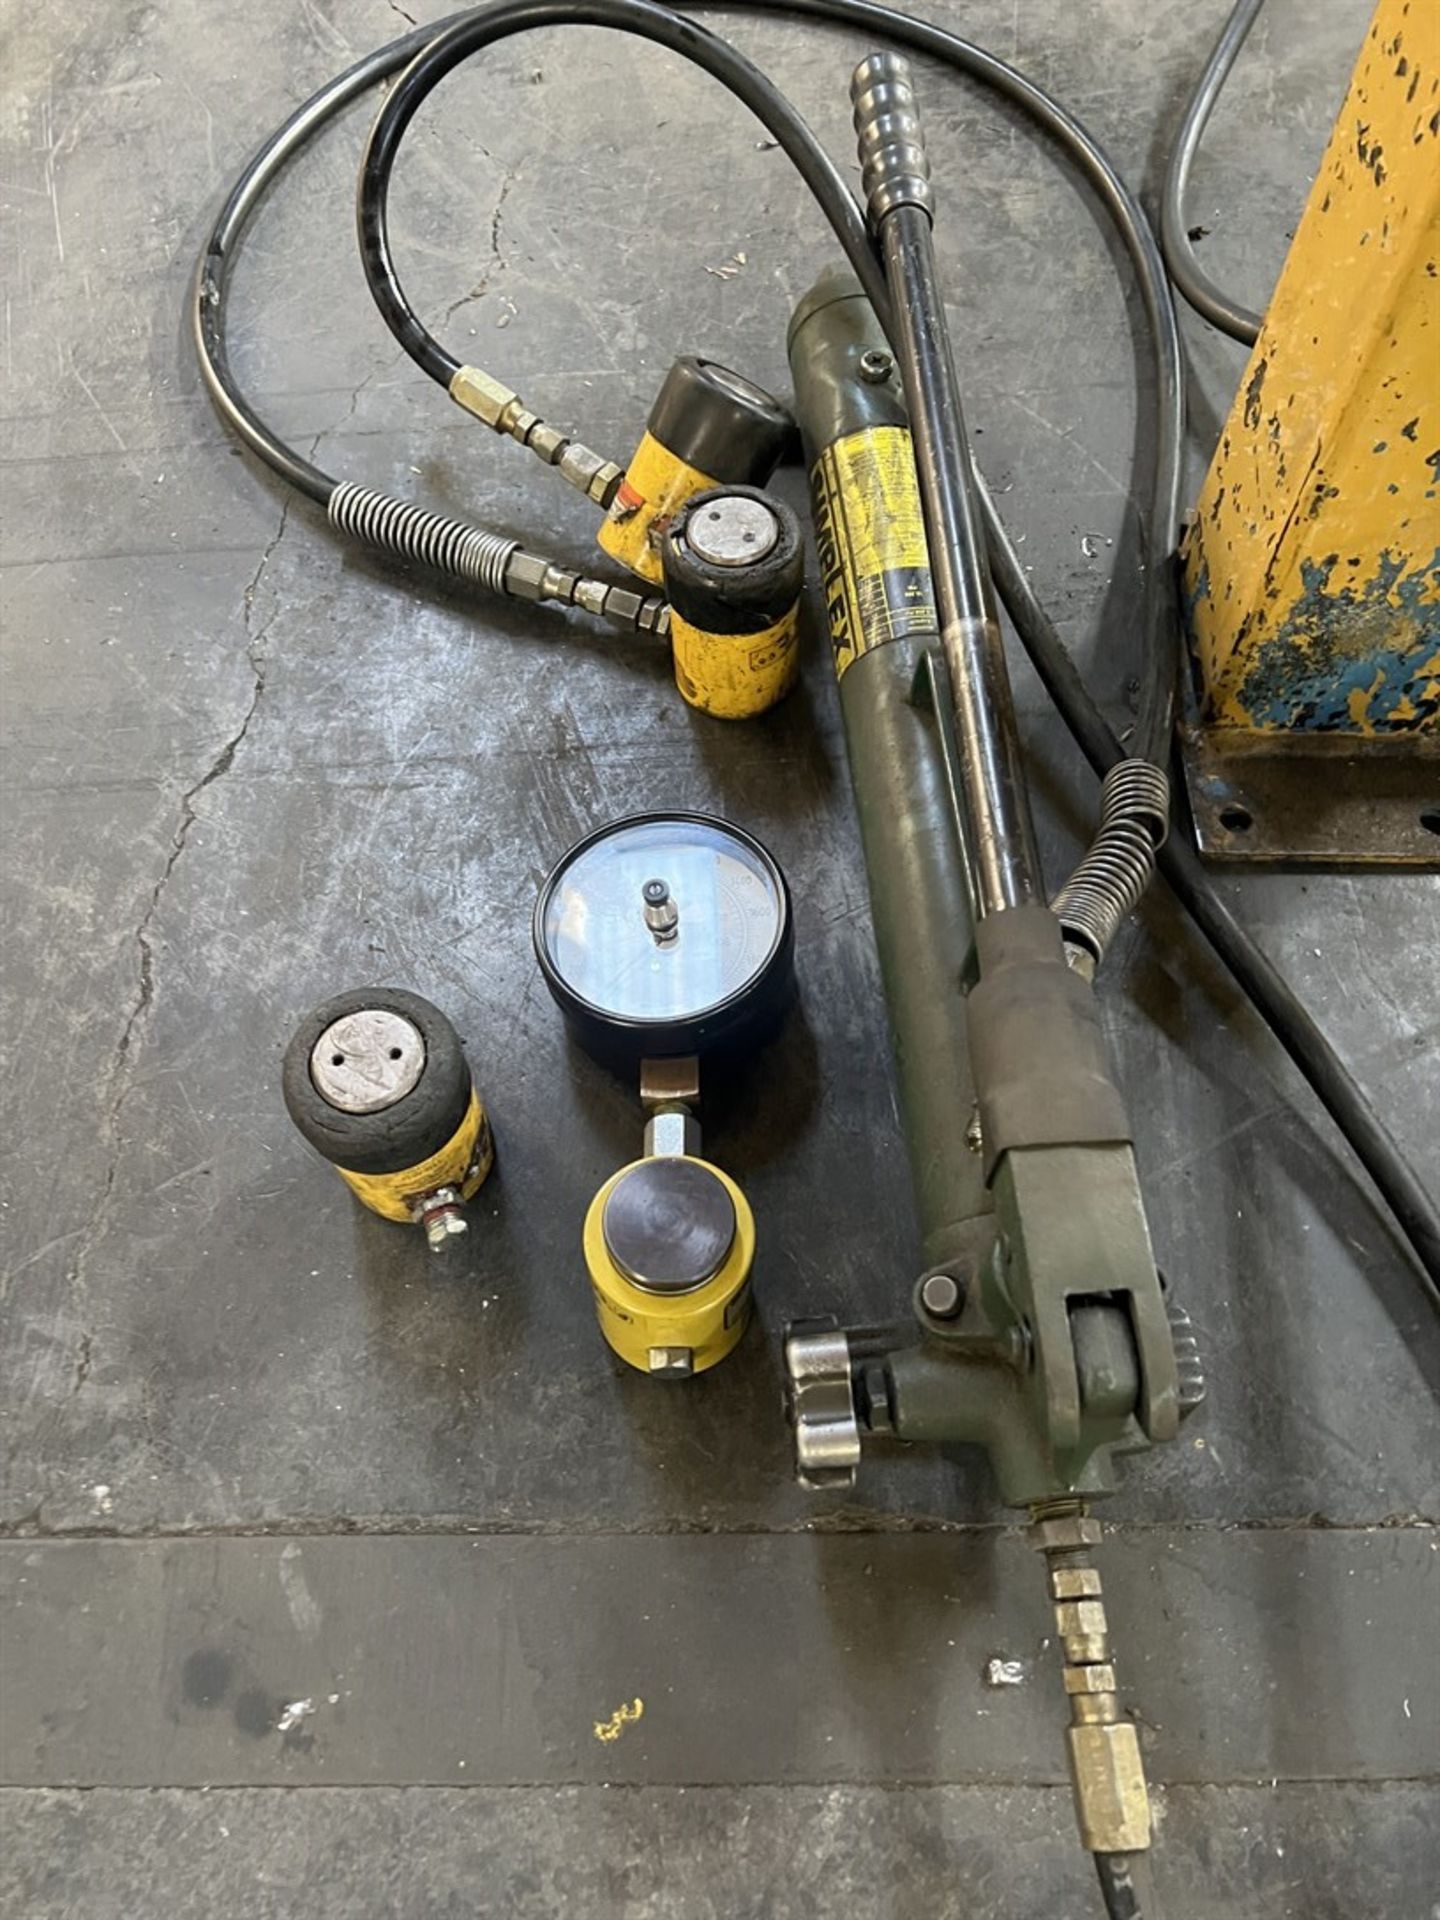 Lot Comprising Assorted Enerpac Hydraulic Pumps and Cylinders (Machine Shop) - Image 3 of 4